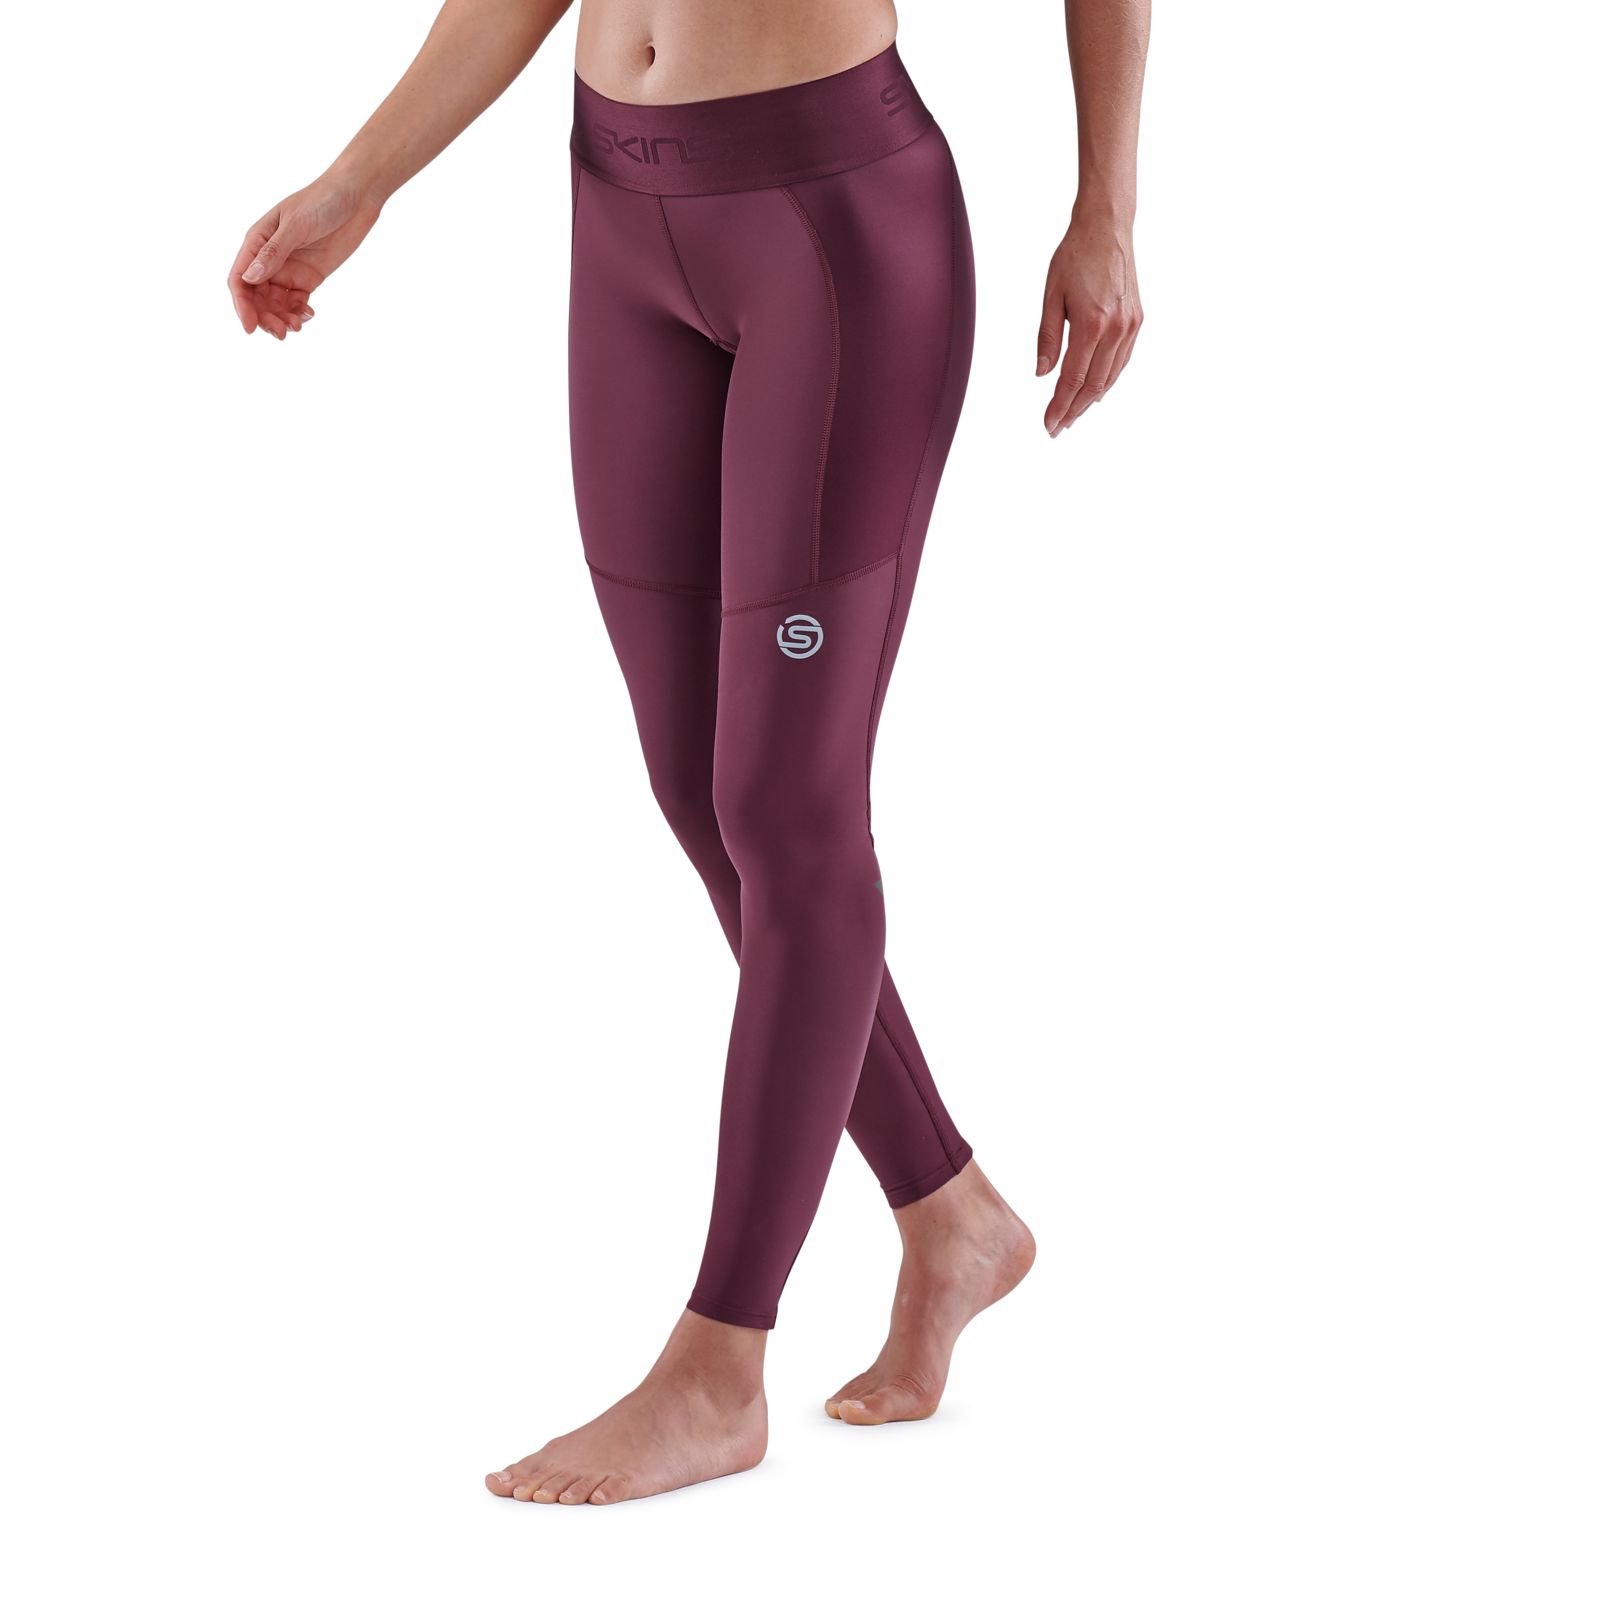 SKINS SERIES-3 WOMEN'S THERMAL LONG TIGHTS BURGUNDY - SKINS Compression USA